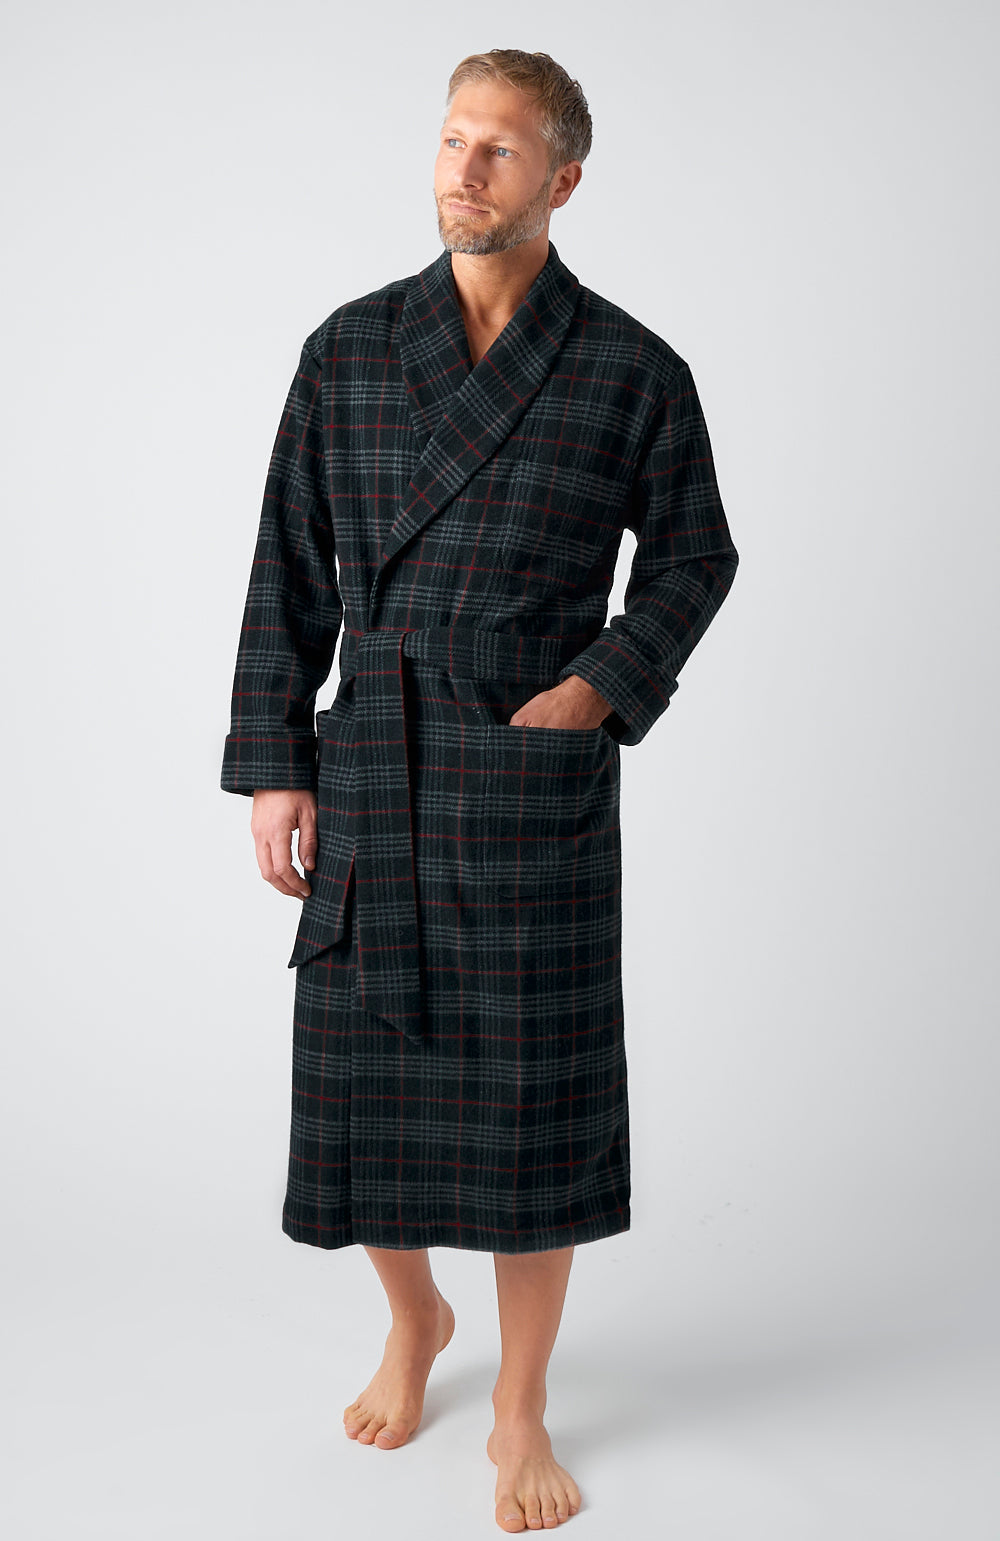 CLASSIC DRESSING GOWN FOR MAN IN 10CASHMERE90 WOOL WITH PIPING AND HALF  BEMBERG LINING  Mens dressing gown Gowns dresses Mens loungewear